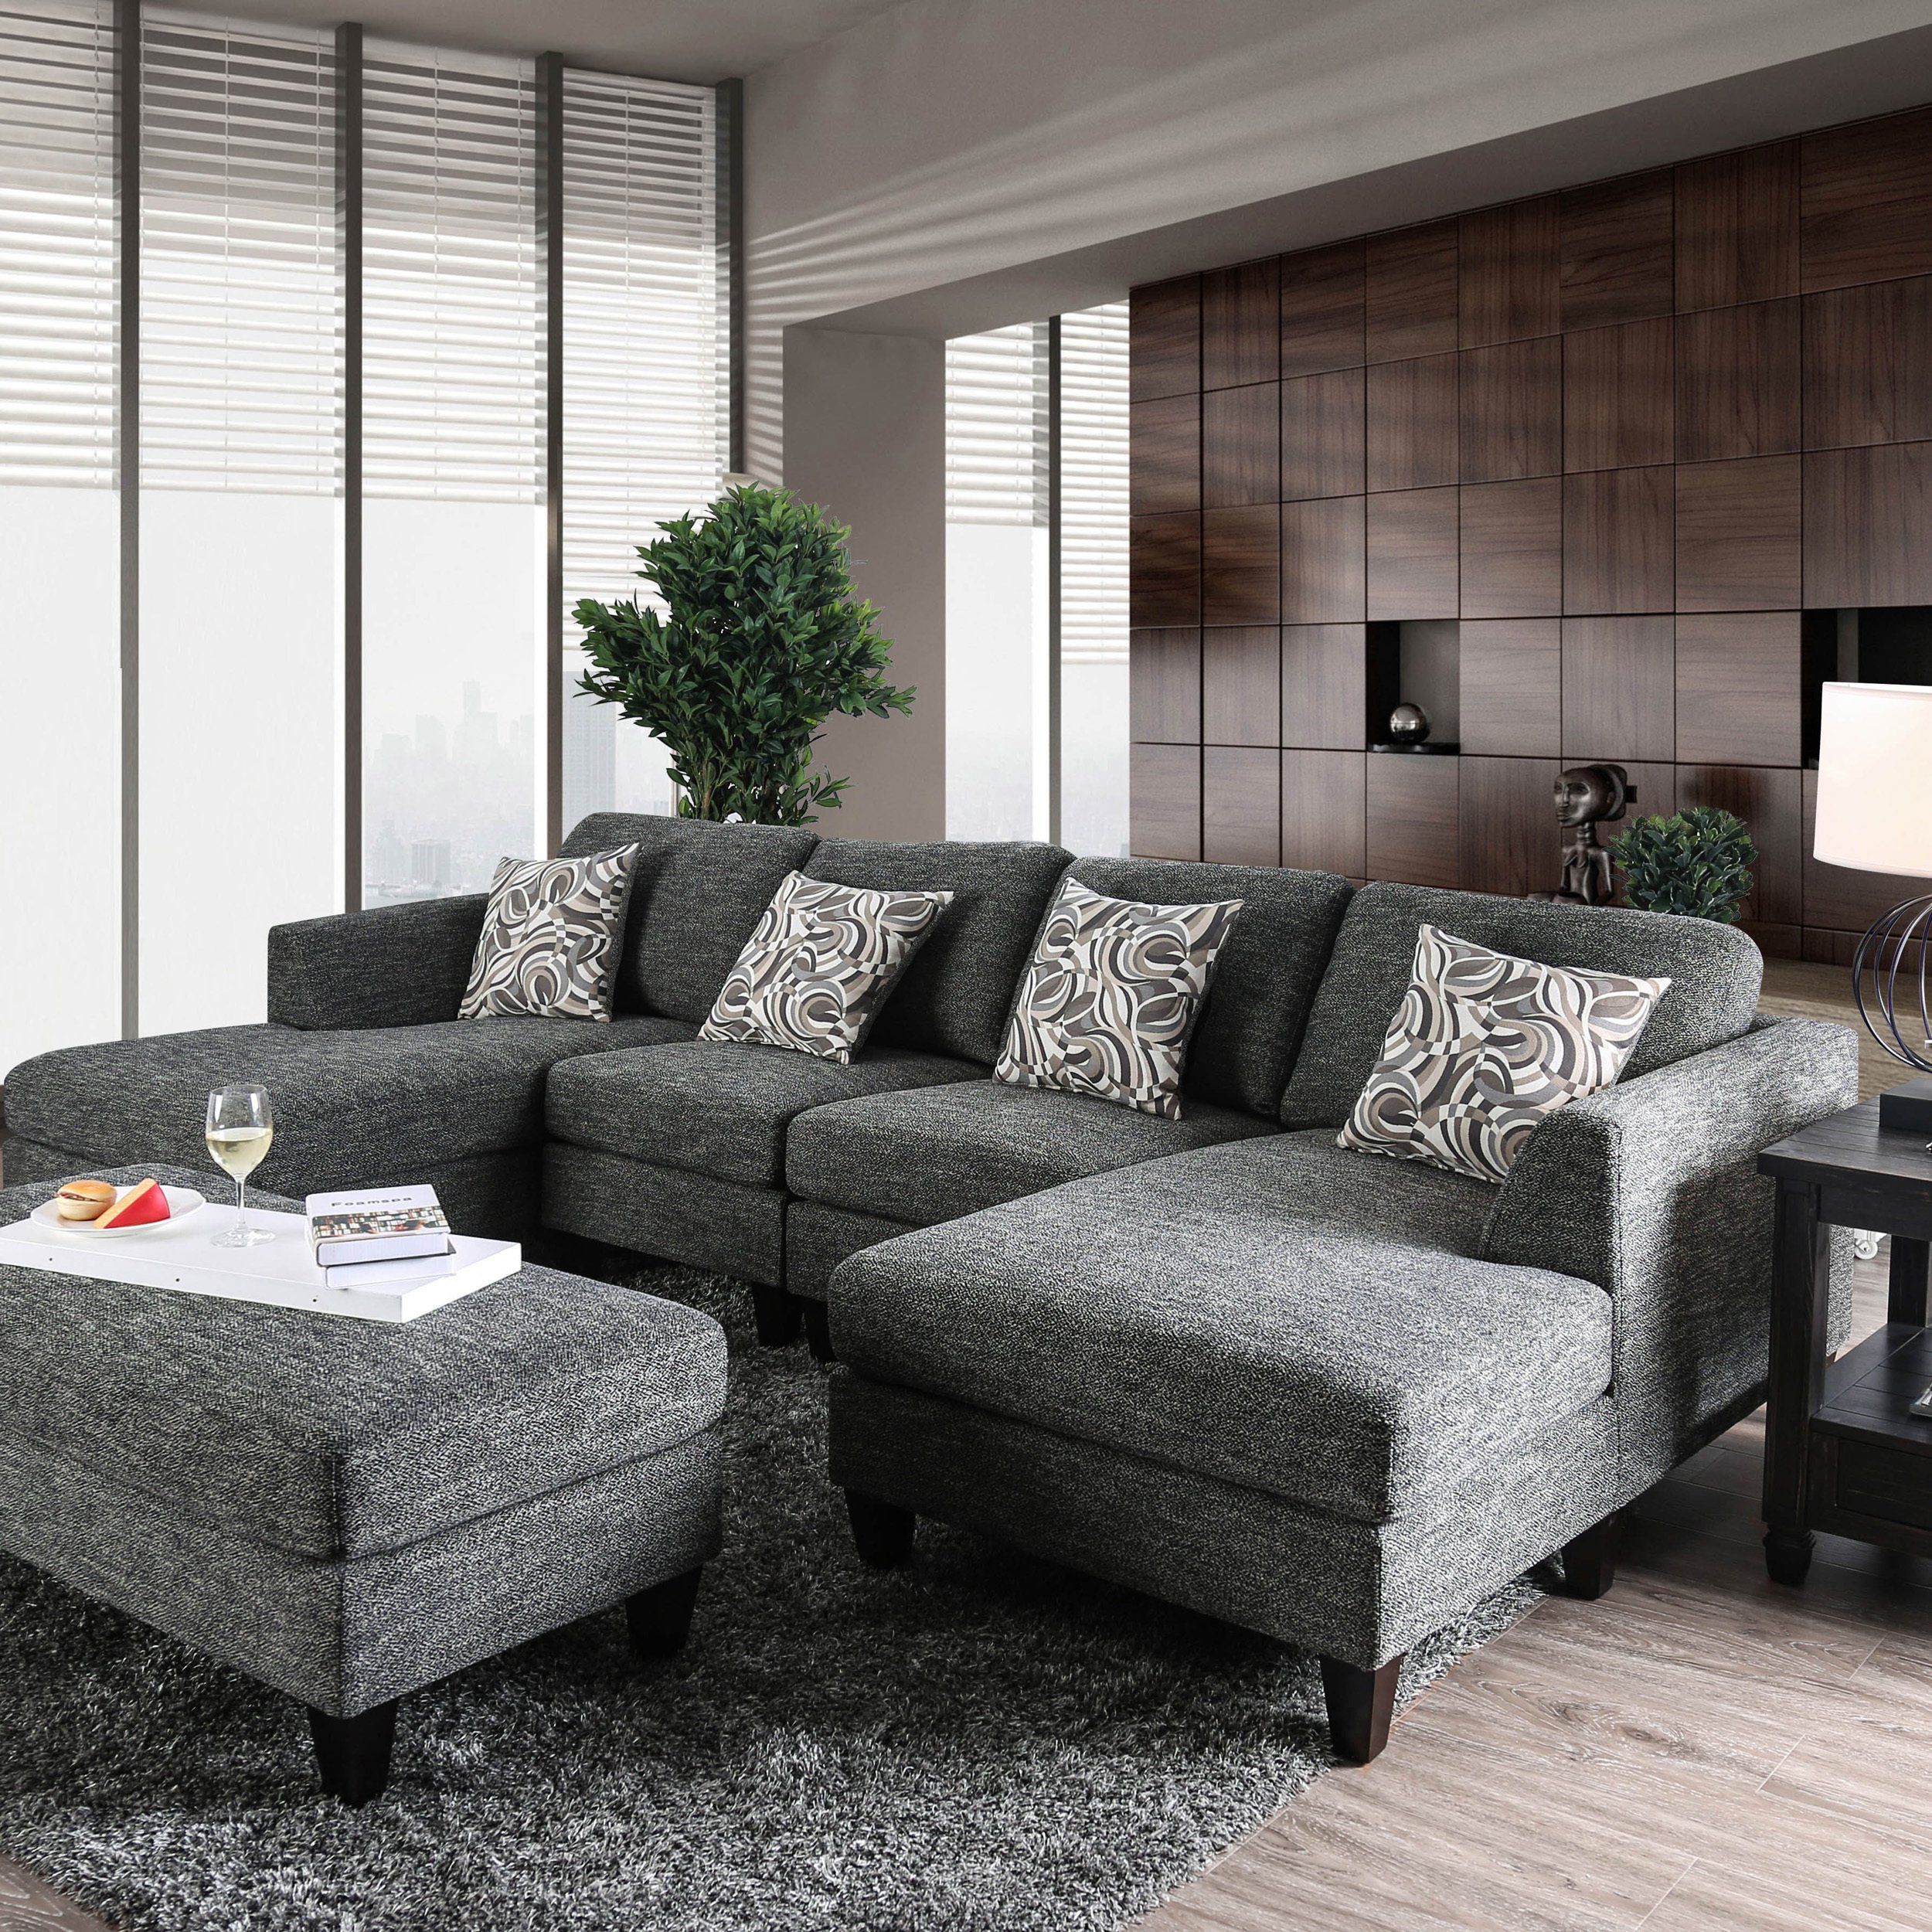 Breckenridge Grey 4 Piece Chenille Modular Sectional Sofafoa (grey With Regard To Chenille Sectional Sofas (View 15 of 20)